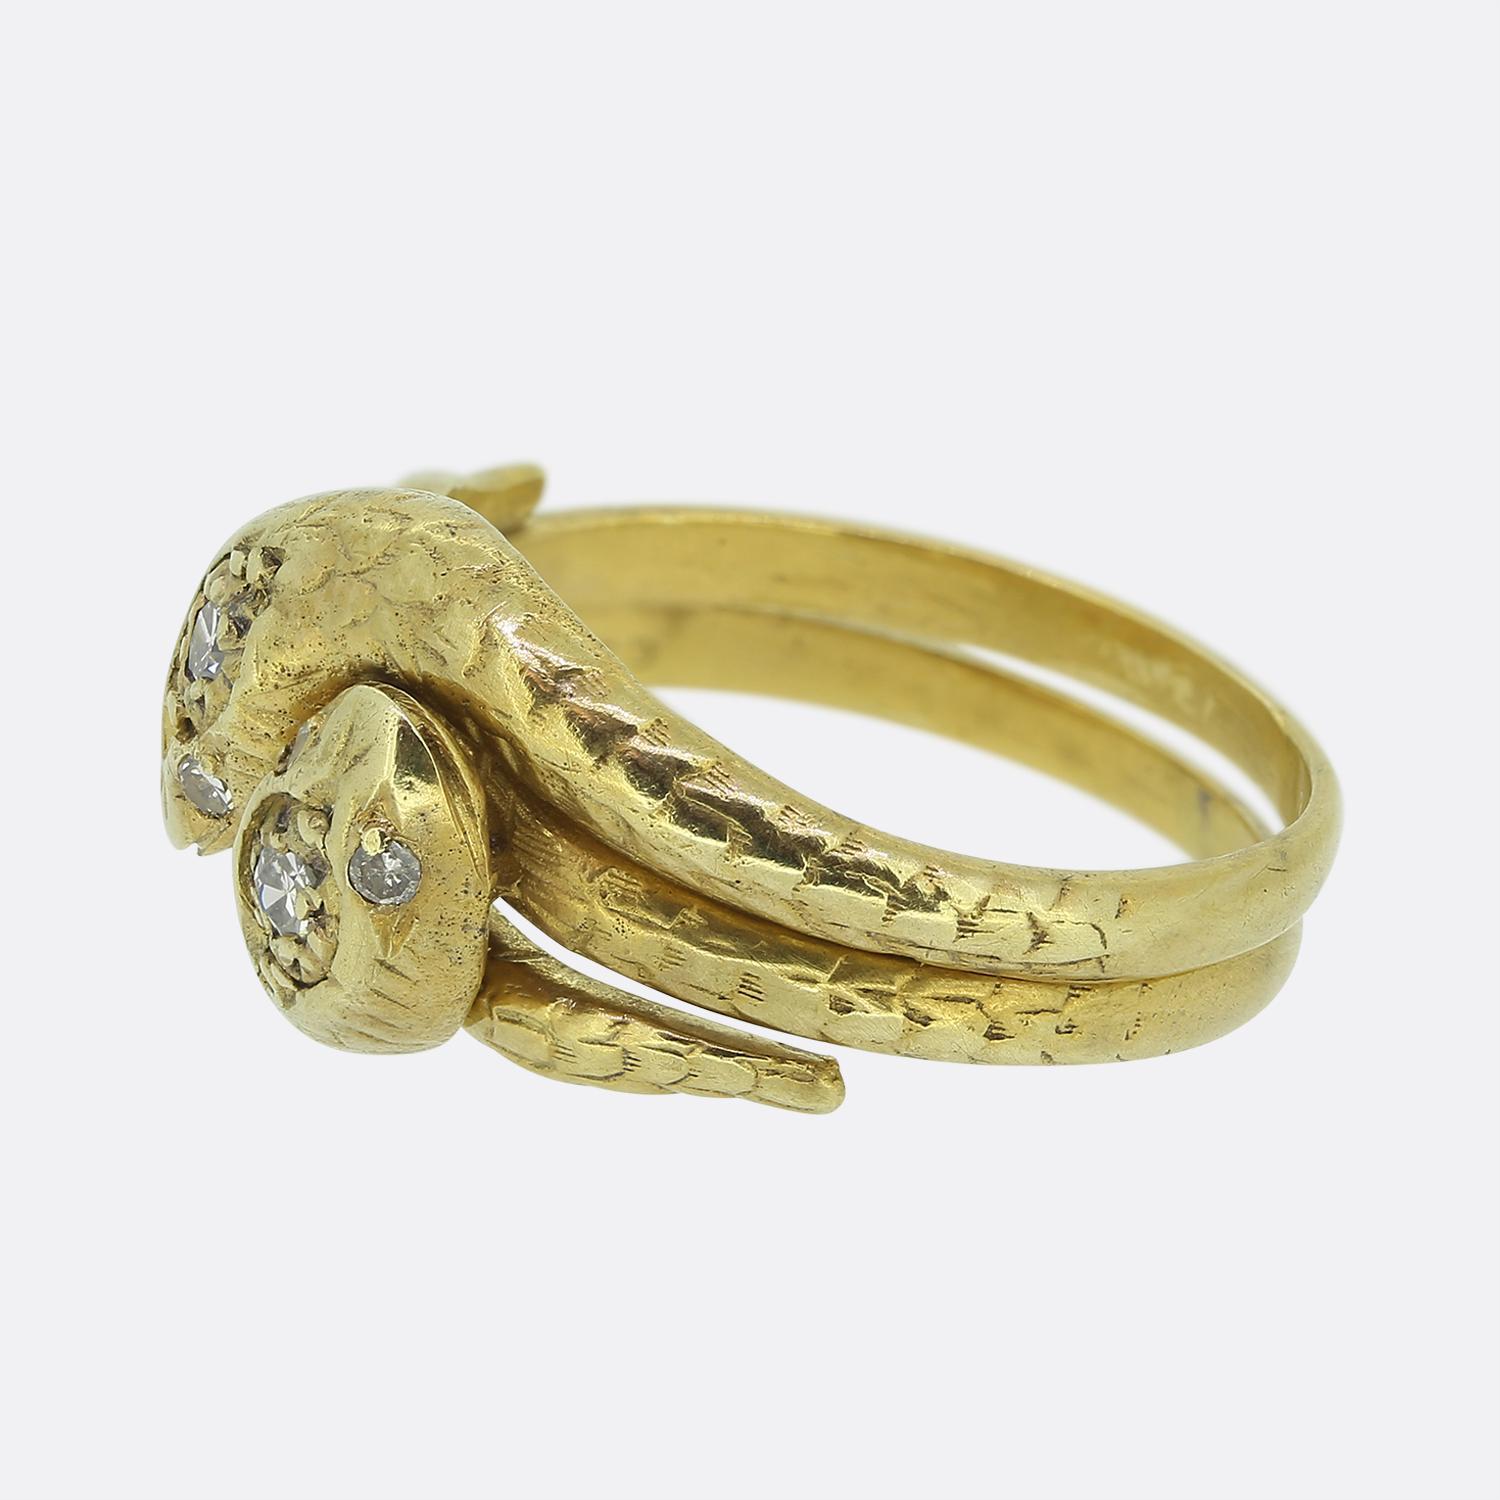 Here we have an exquisite double snake ring taken from the early stages of the 20th century. This antique piece has been handcrafted from 14ct yellow gold with meticulous attention to detail. The ring portrays two individual entwined snakes, which